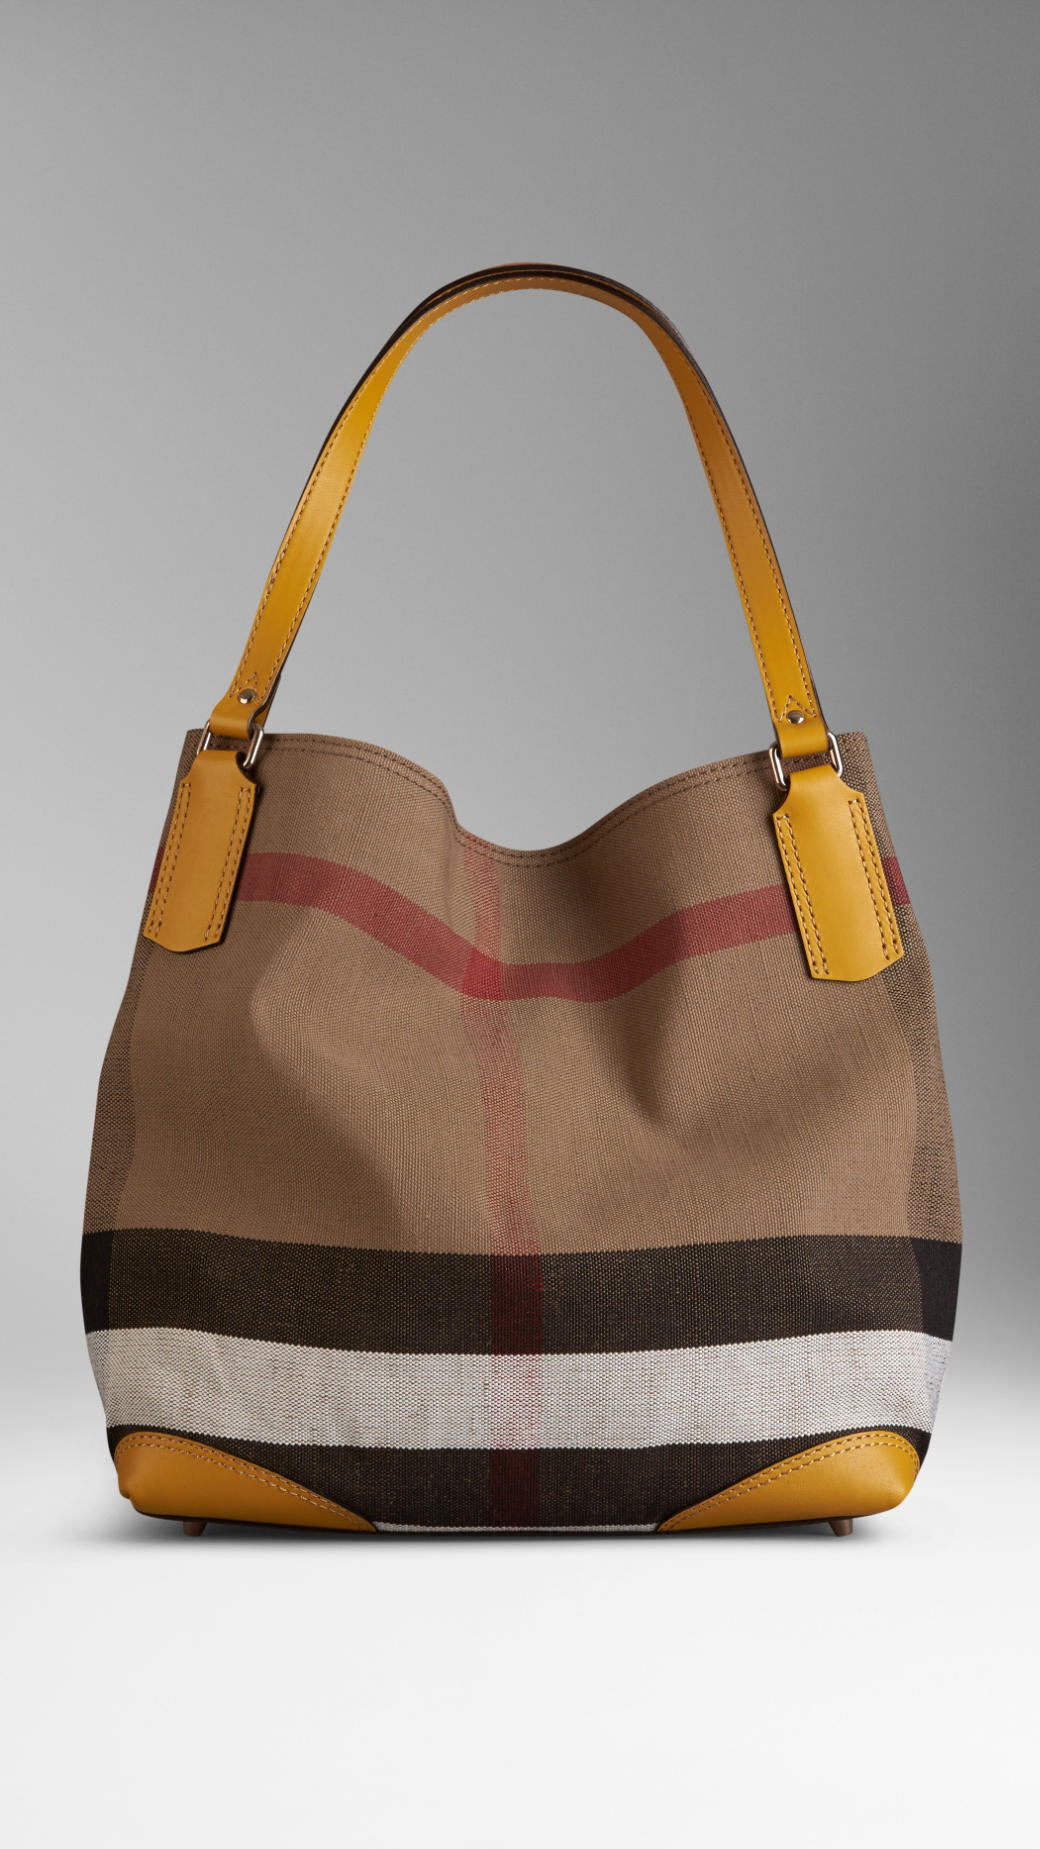 Lyst - Burberry Medium Canvas Check Tote Bag in Yellow